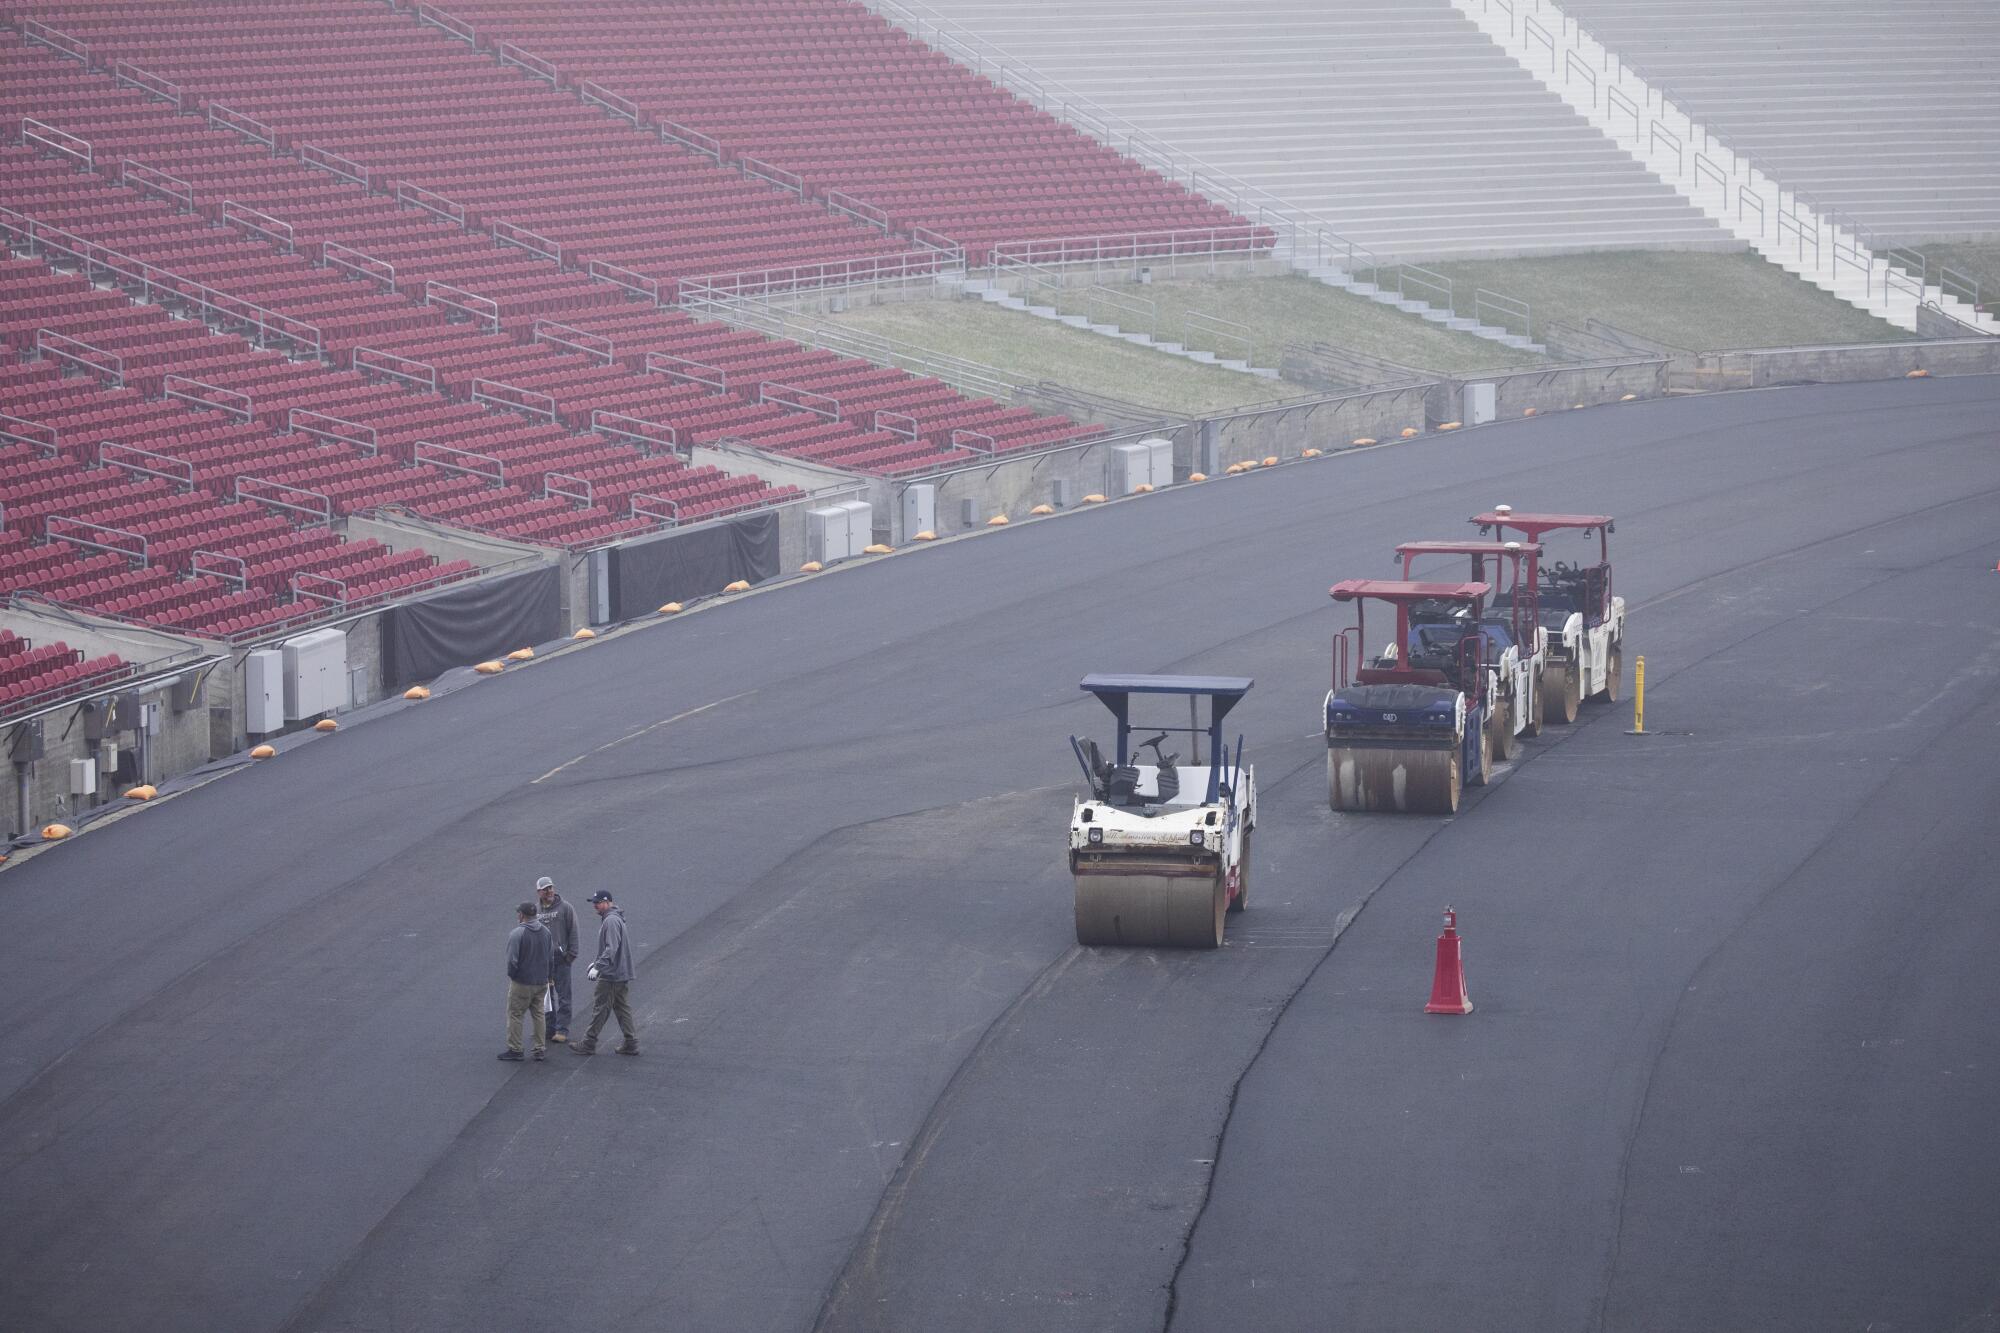 Construction workers steamroll asphalt inside the Coliseum in preparation for a NASCAR exhibition race.